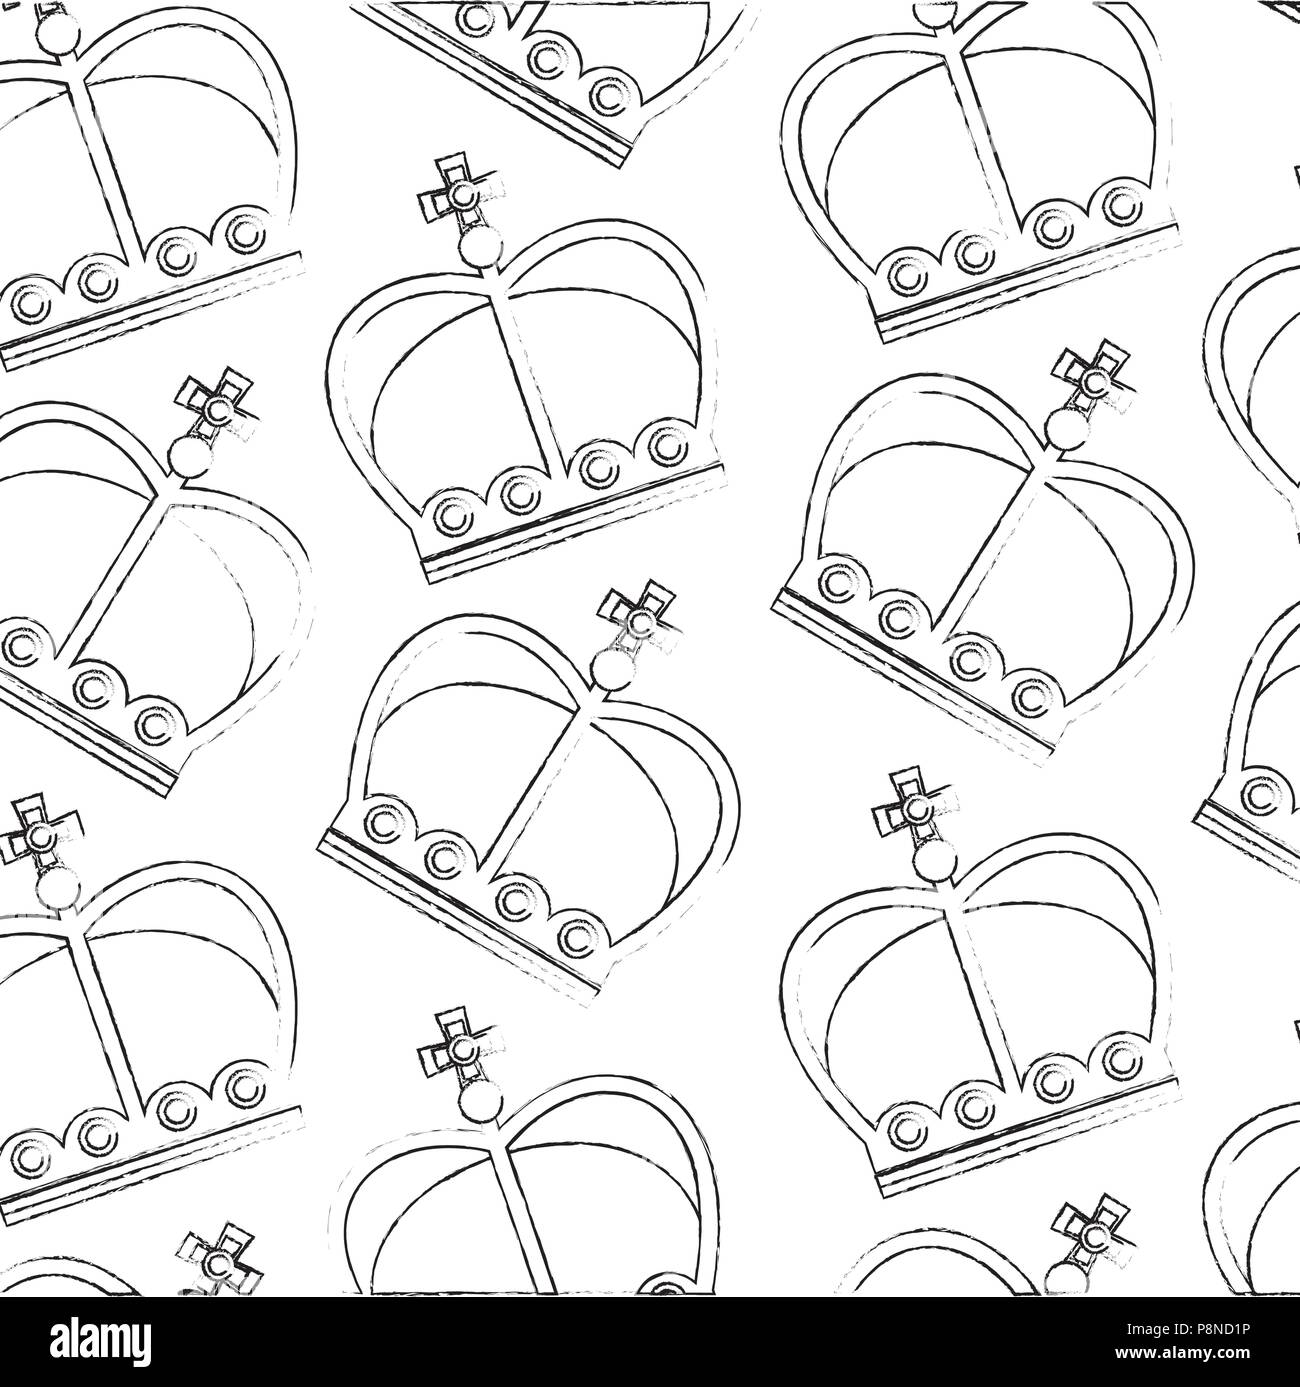 crown of kings icon pattern vector illustration design Stock Vector